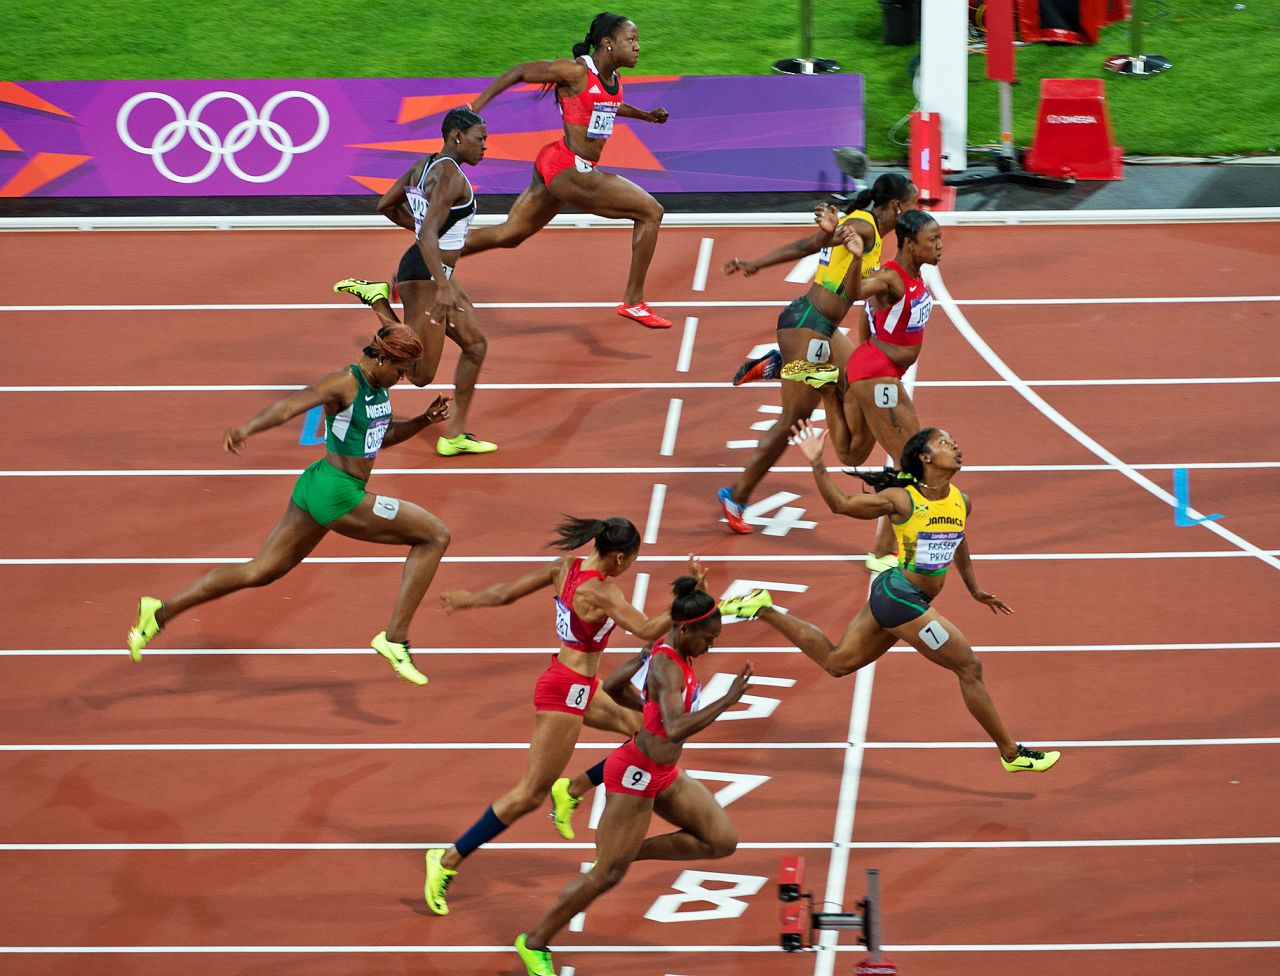 At London 2012, Fraser-Pryce triumphed in a time of 10.75 seconds from American Carmelita Jeter and fellow Jamaican Veronica Campbell-Brown.